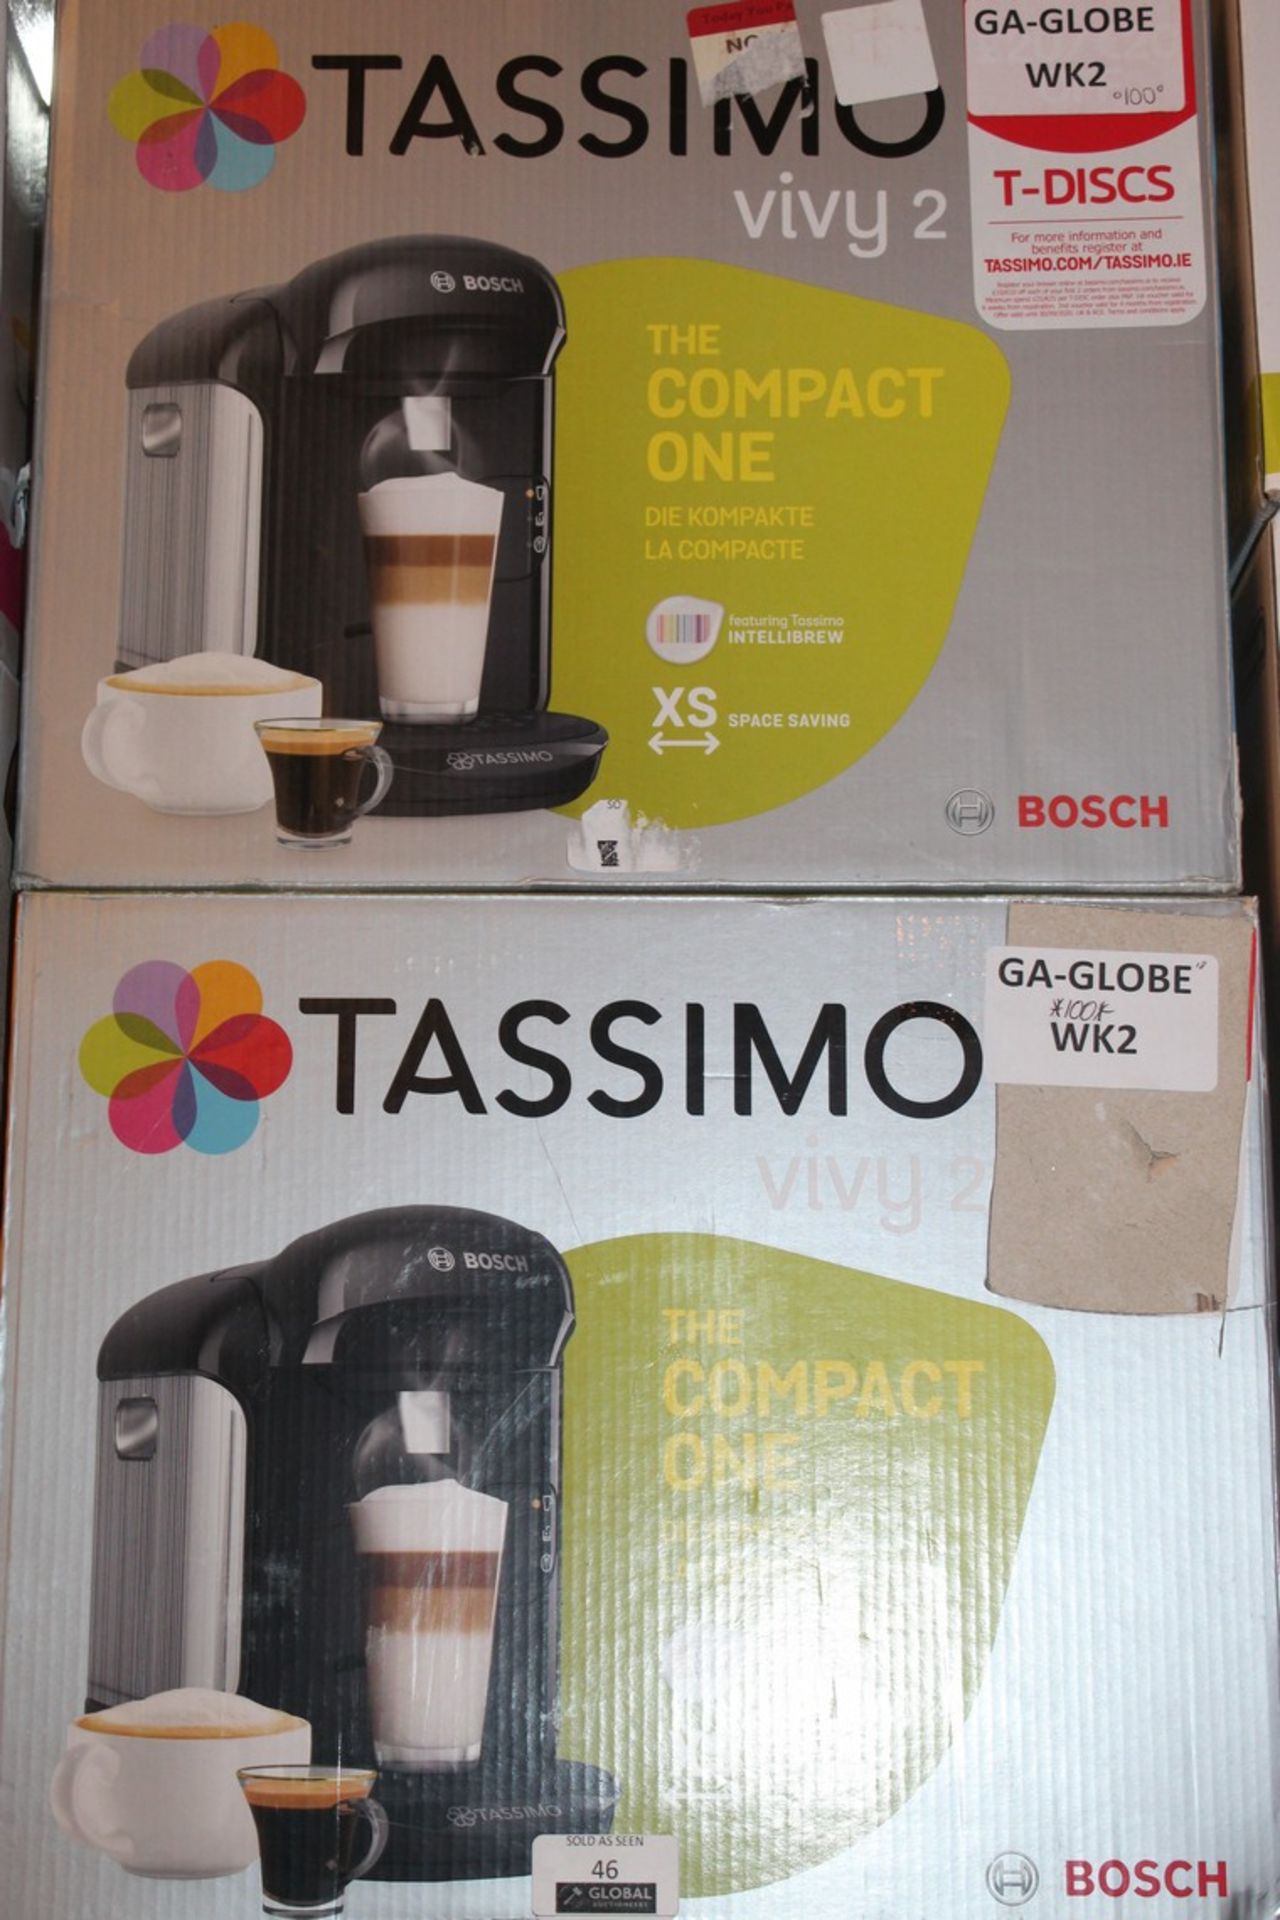 Lot To Contain 2 Boxed Bosch Tassimo Rivvy 2 Coffee Makers Combined RRP £200 (Untested Customer